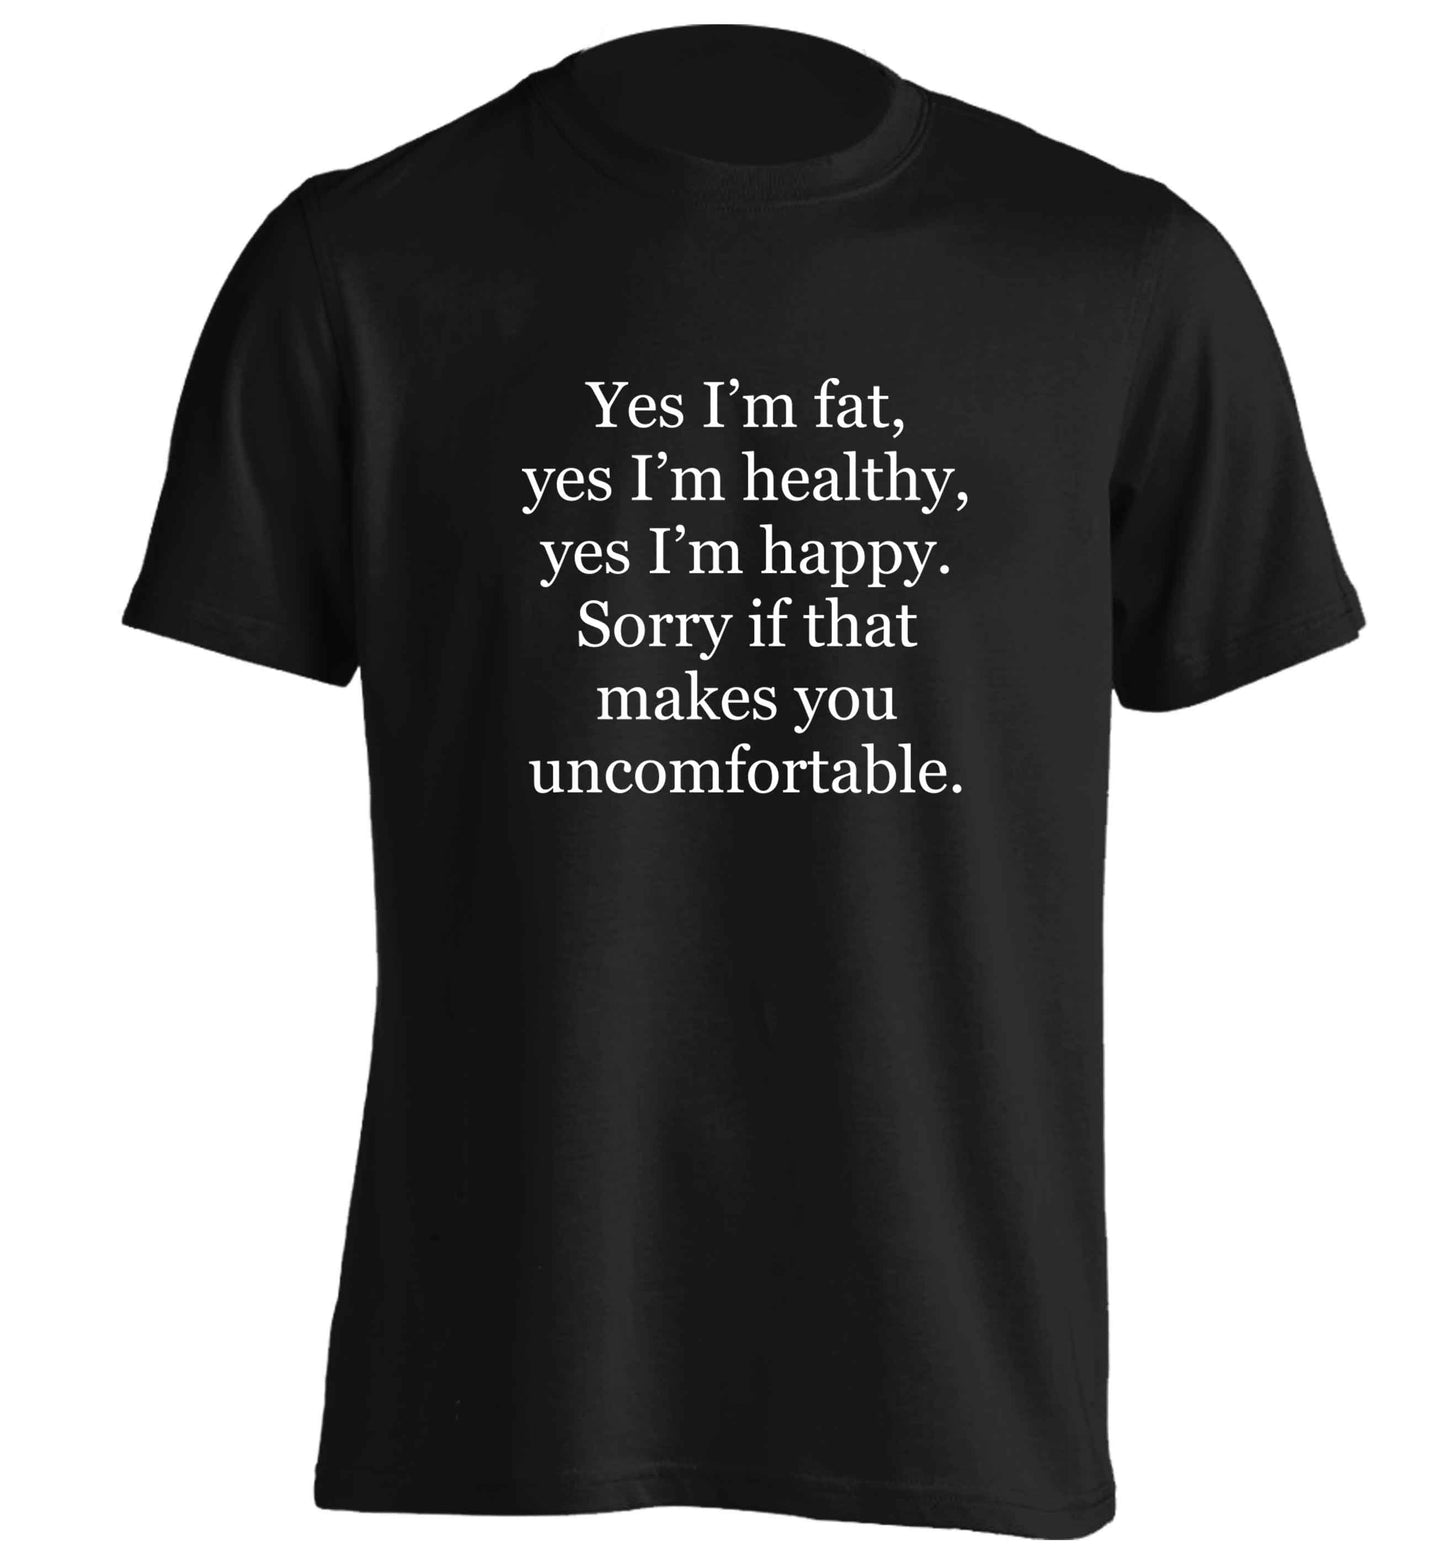 Yes I'm fat, yes I'm healthy, yes I'm happy. Sorry if that makes you uncomfortable adults unisex black Tshirt 2XL